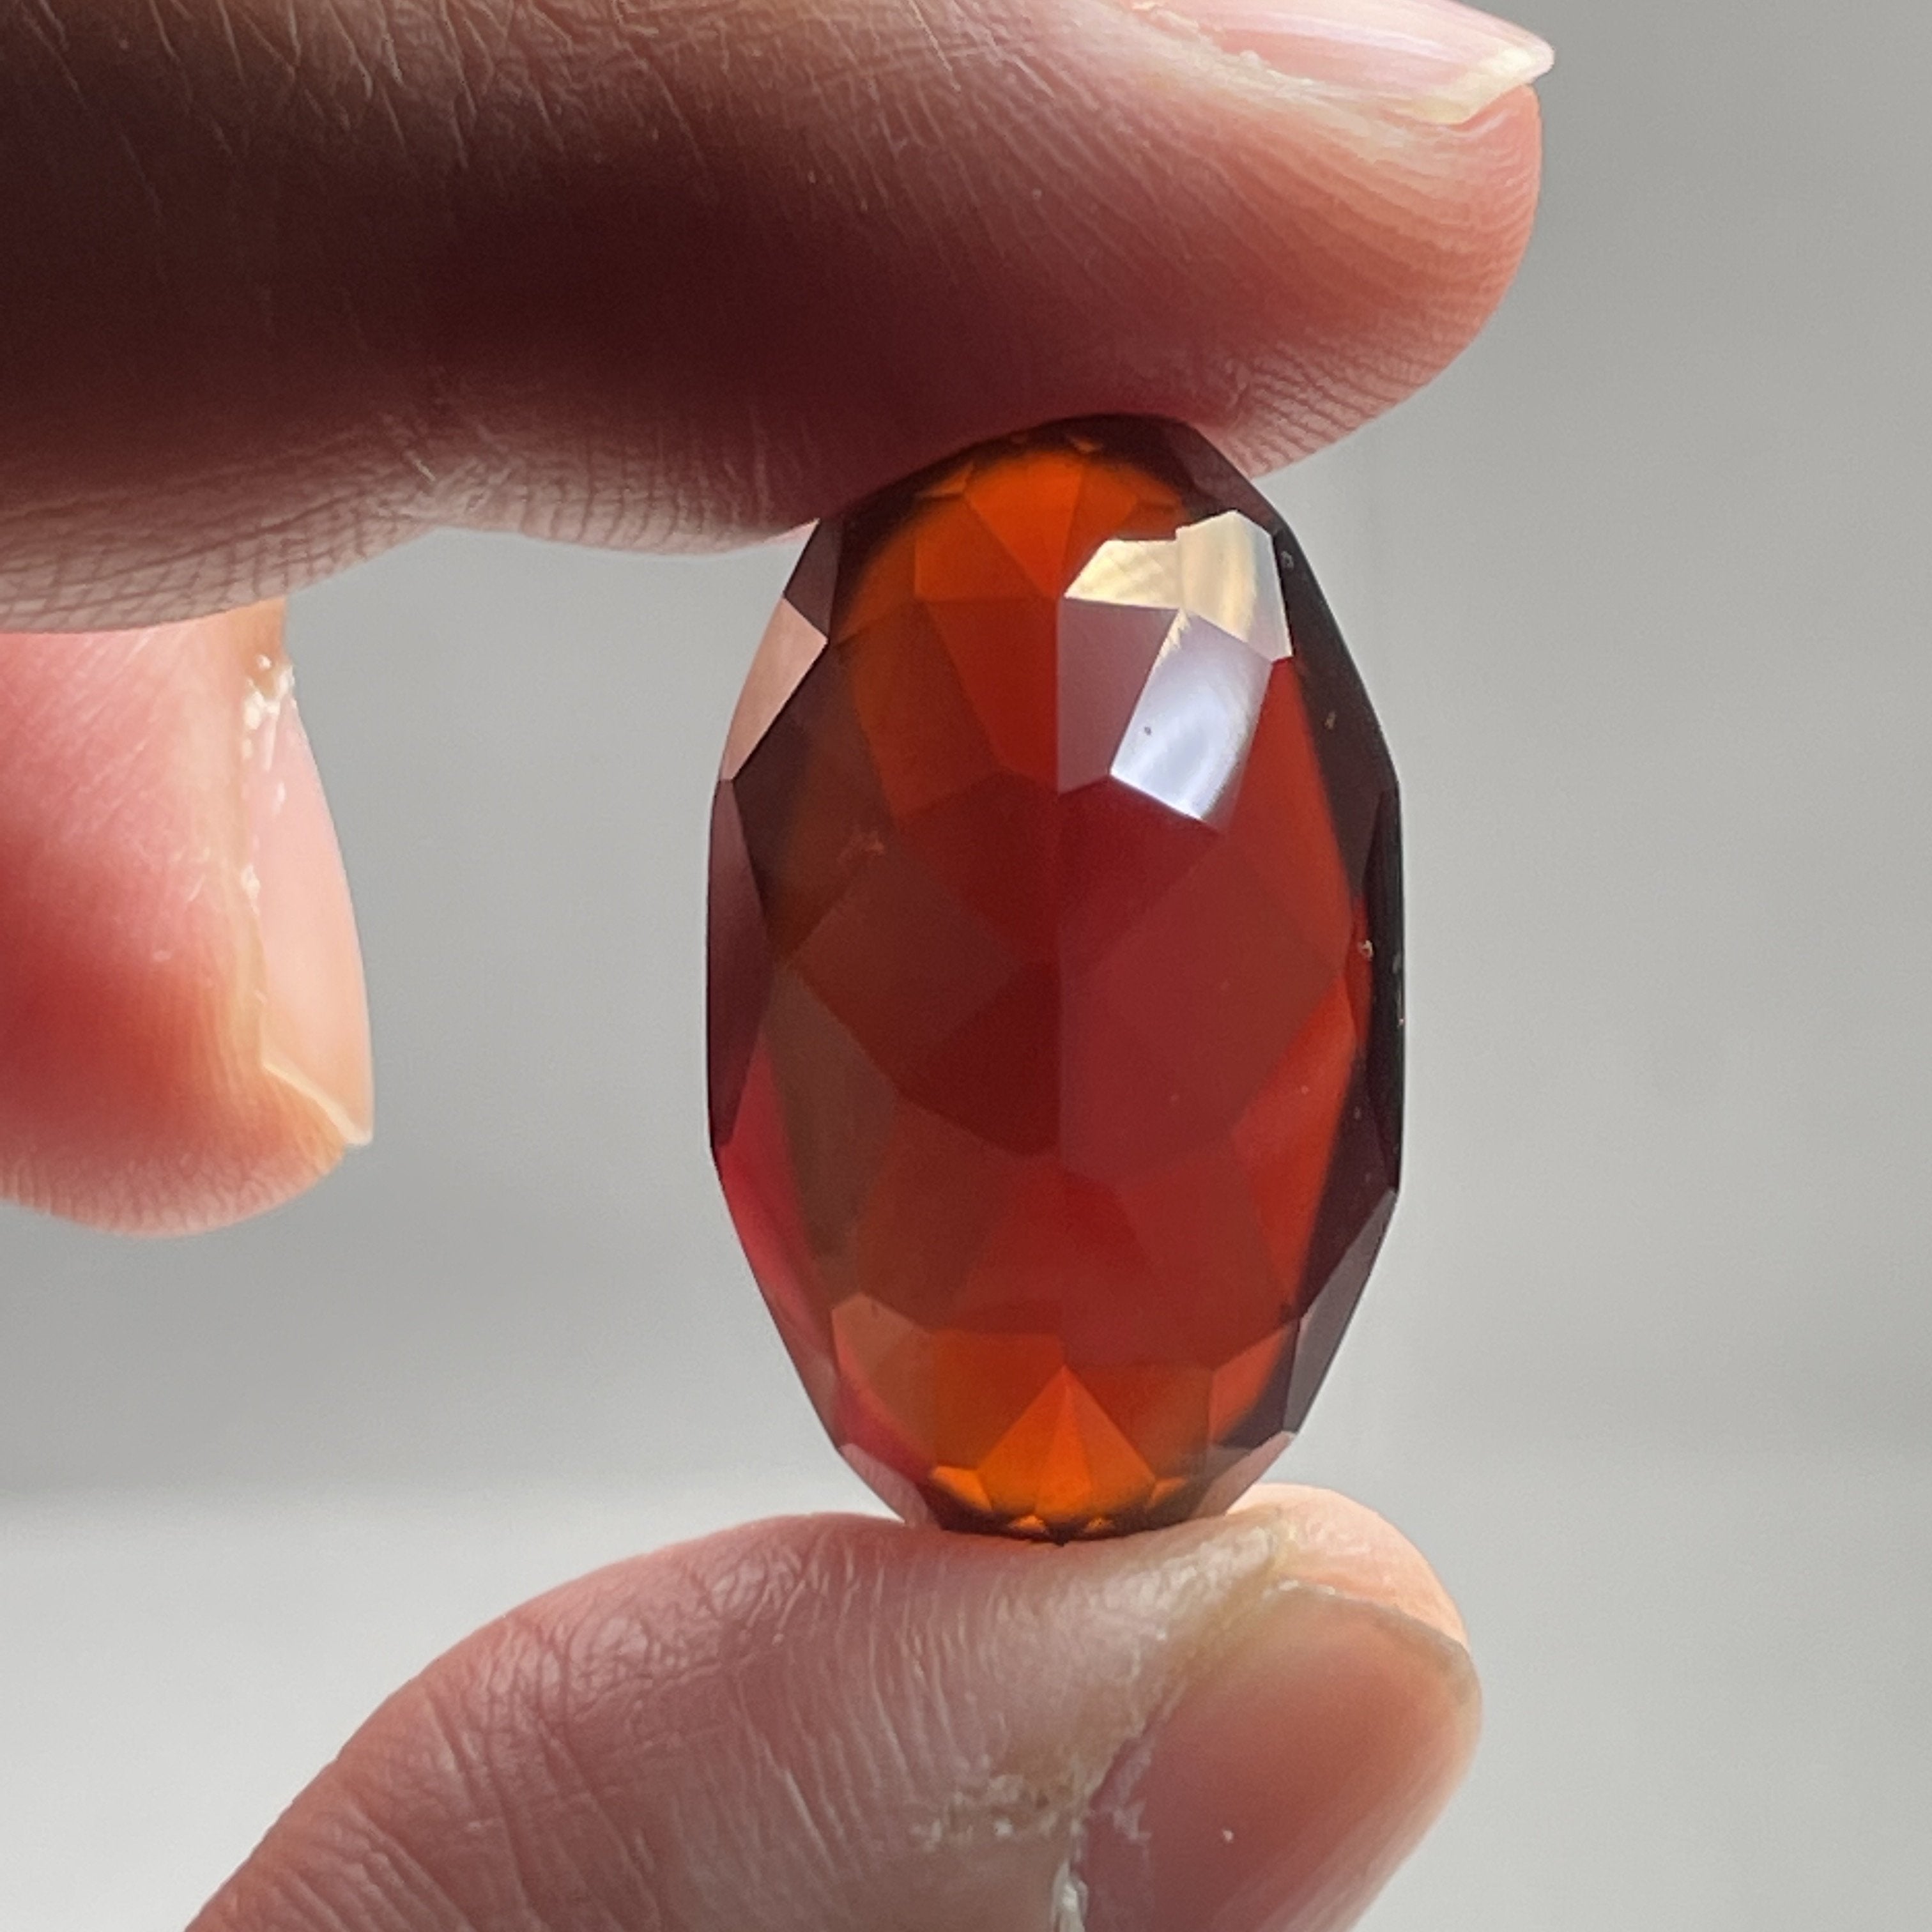 36.49Ct Hessonite Garnet Tanzania Untreated Unheated. 25.2X 14.6 X 11 Mm Use Either Side.